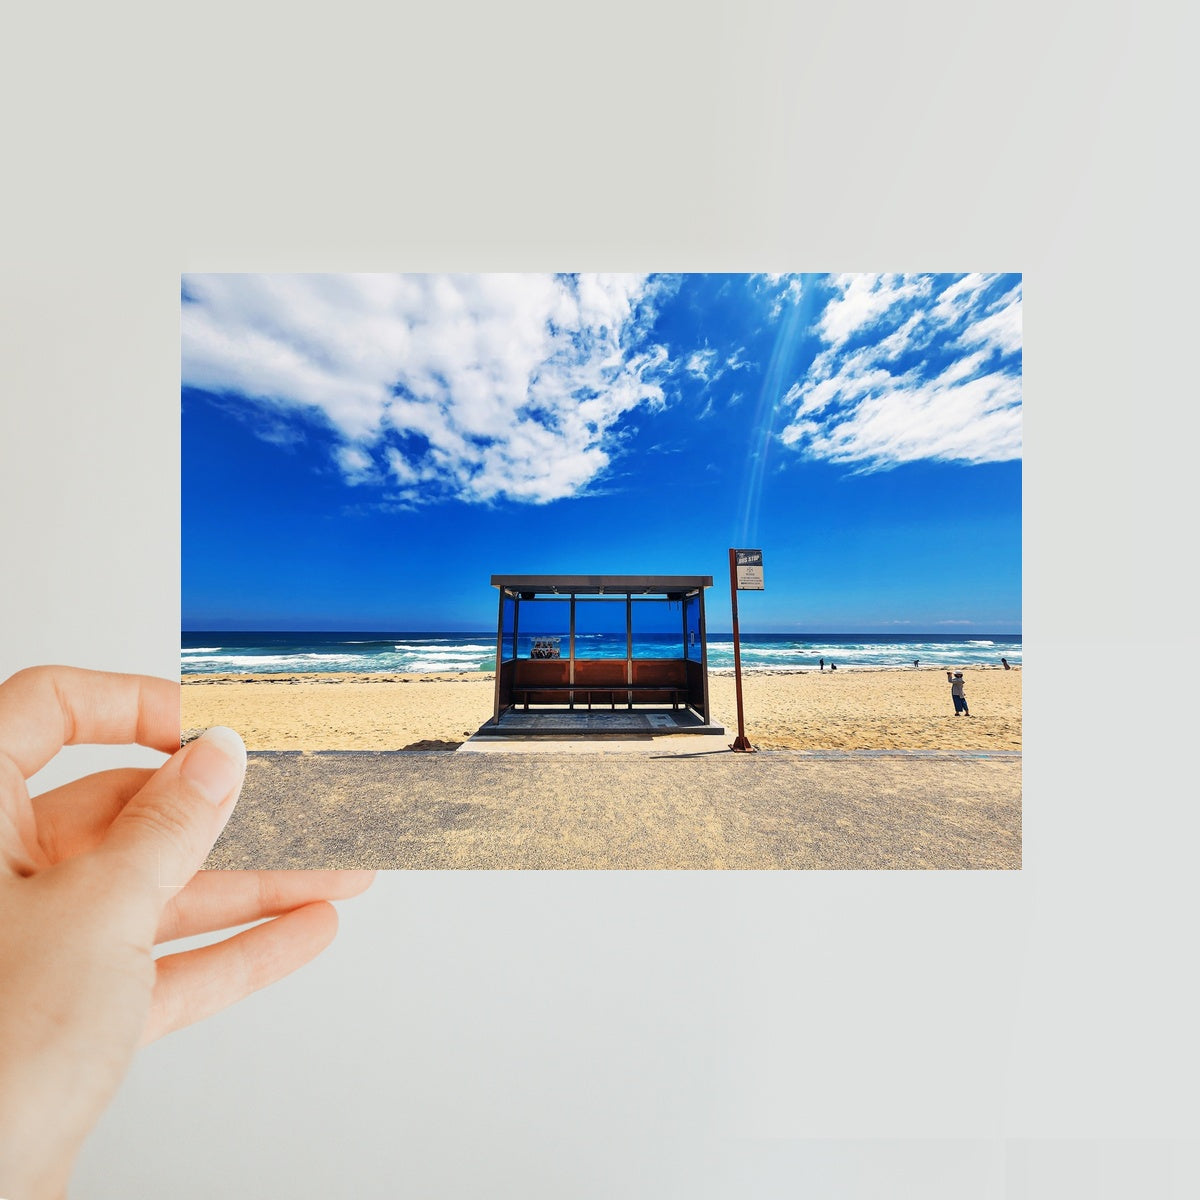 BTS spring day location place bus stop on the beach Classic Postcard